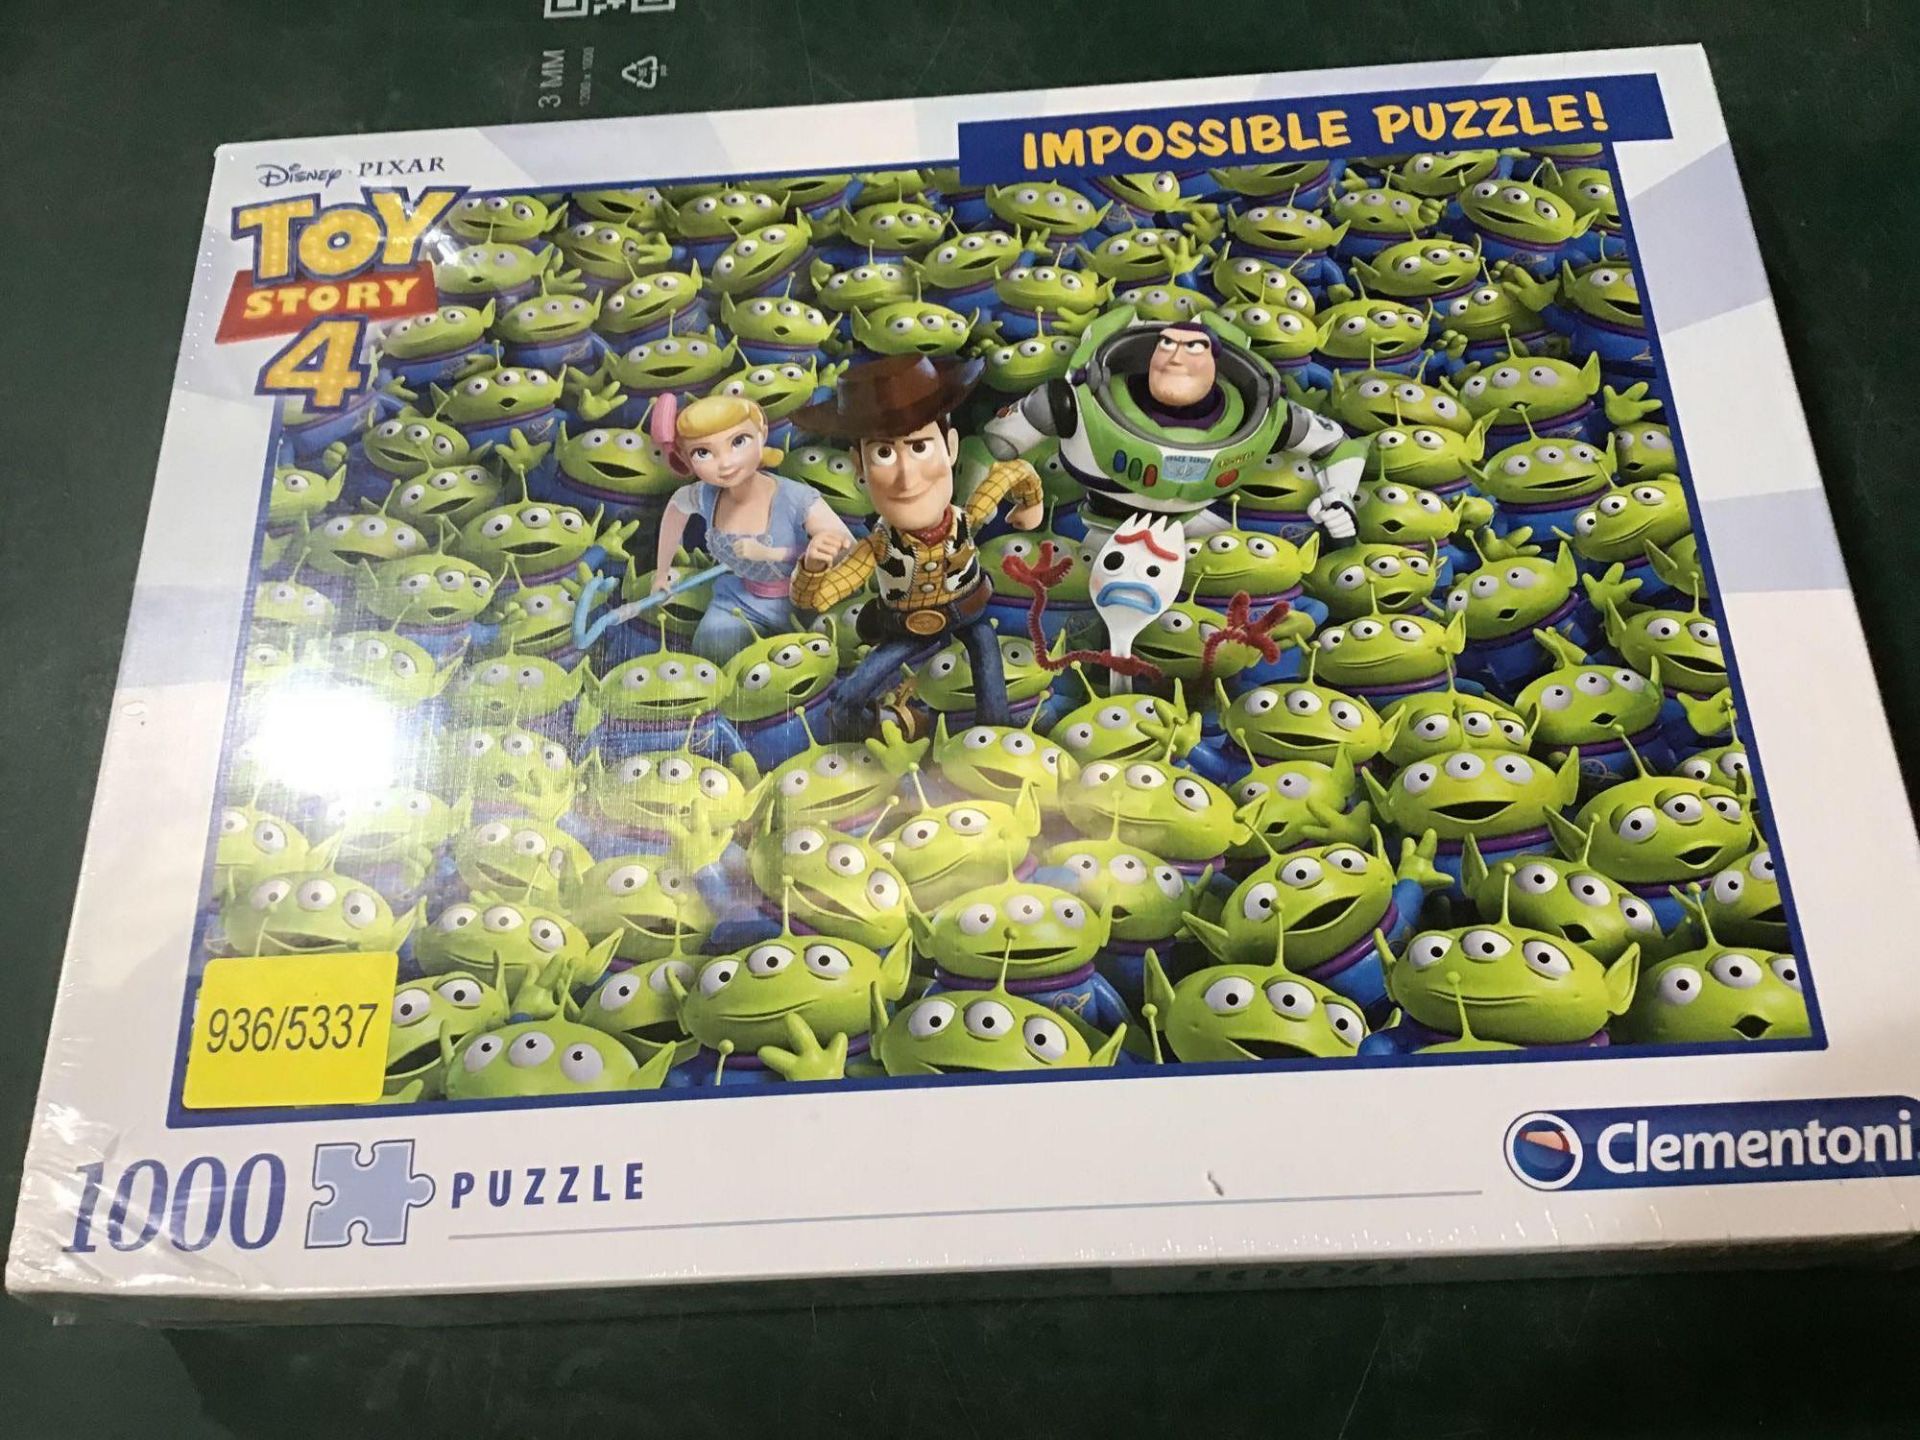 Clementoni Impossible Puzzle Toy Story 4-1000 Pieces - £14.99 RRP - Image 2 of 4